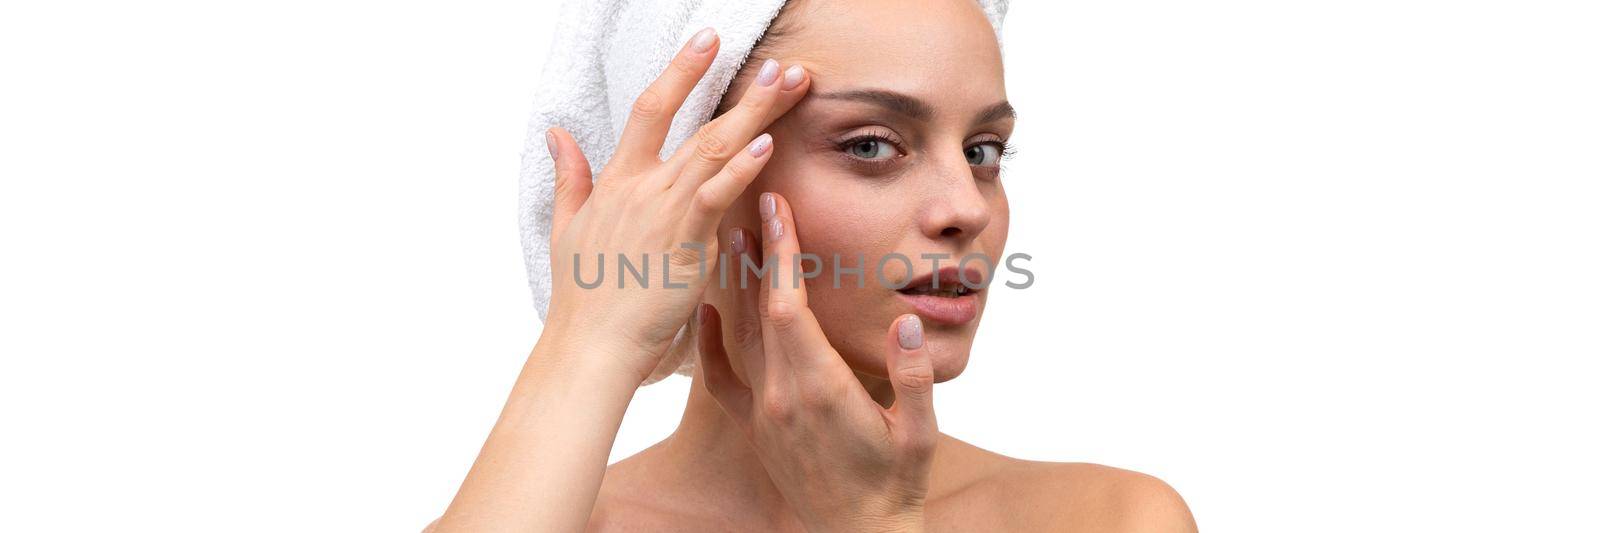 young woman after spa treatments examines her face for wrinkles by TRMK